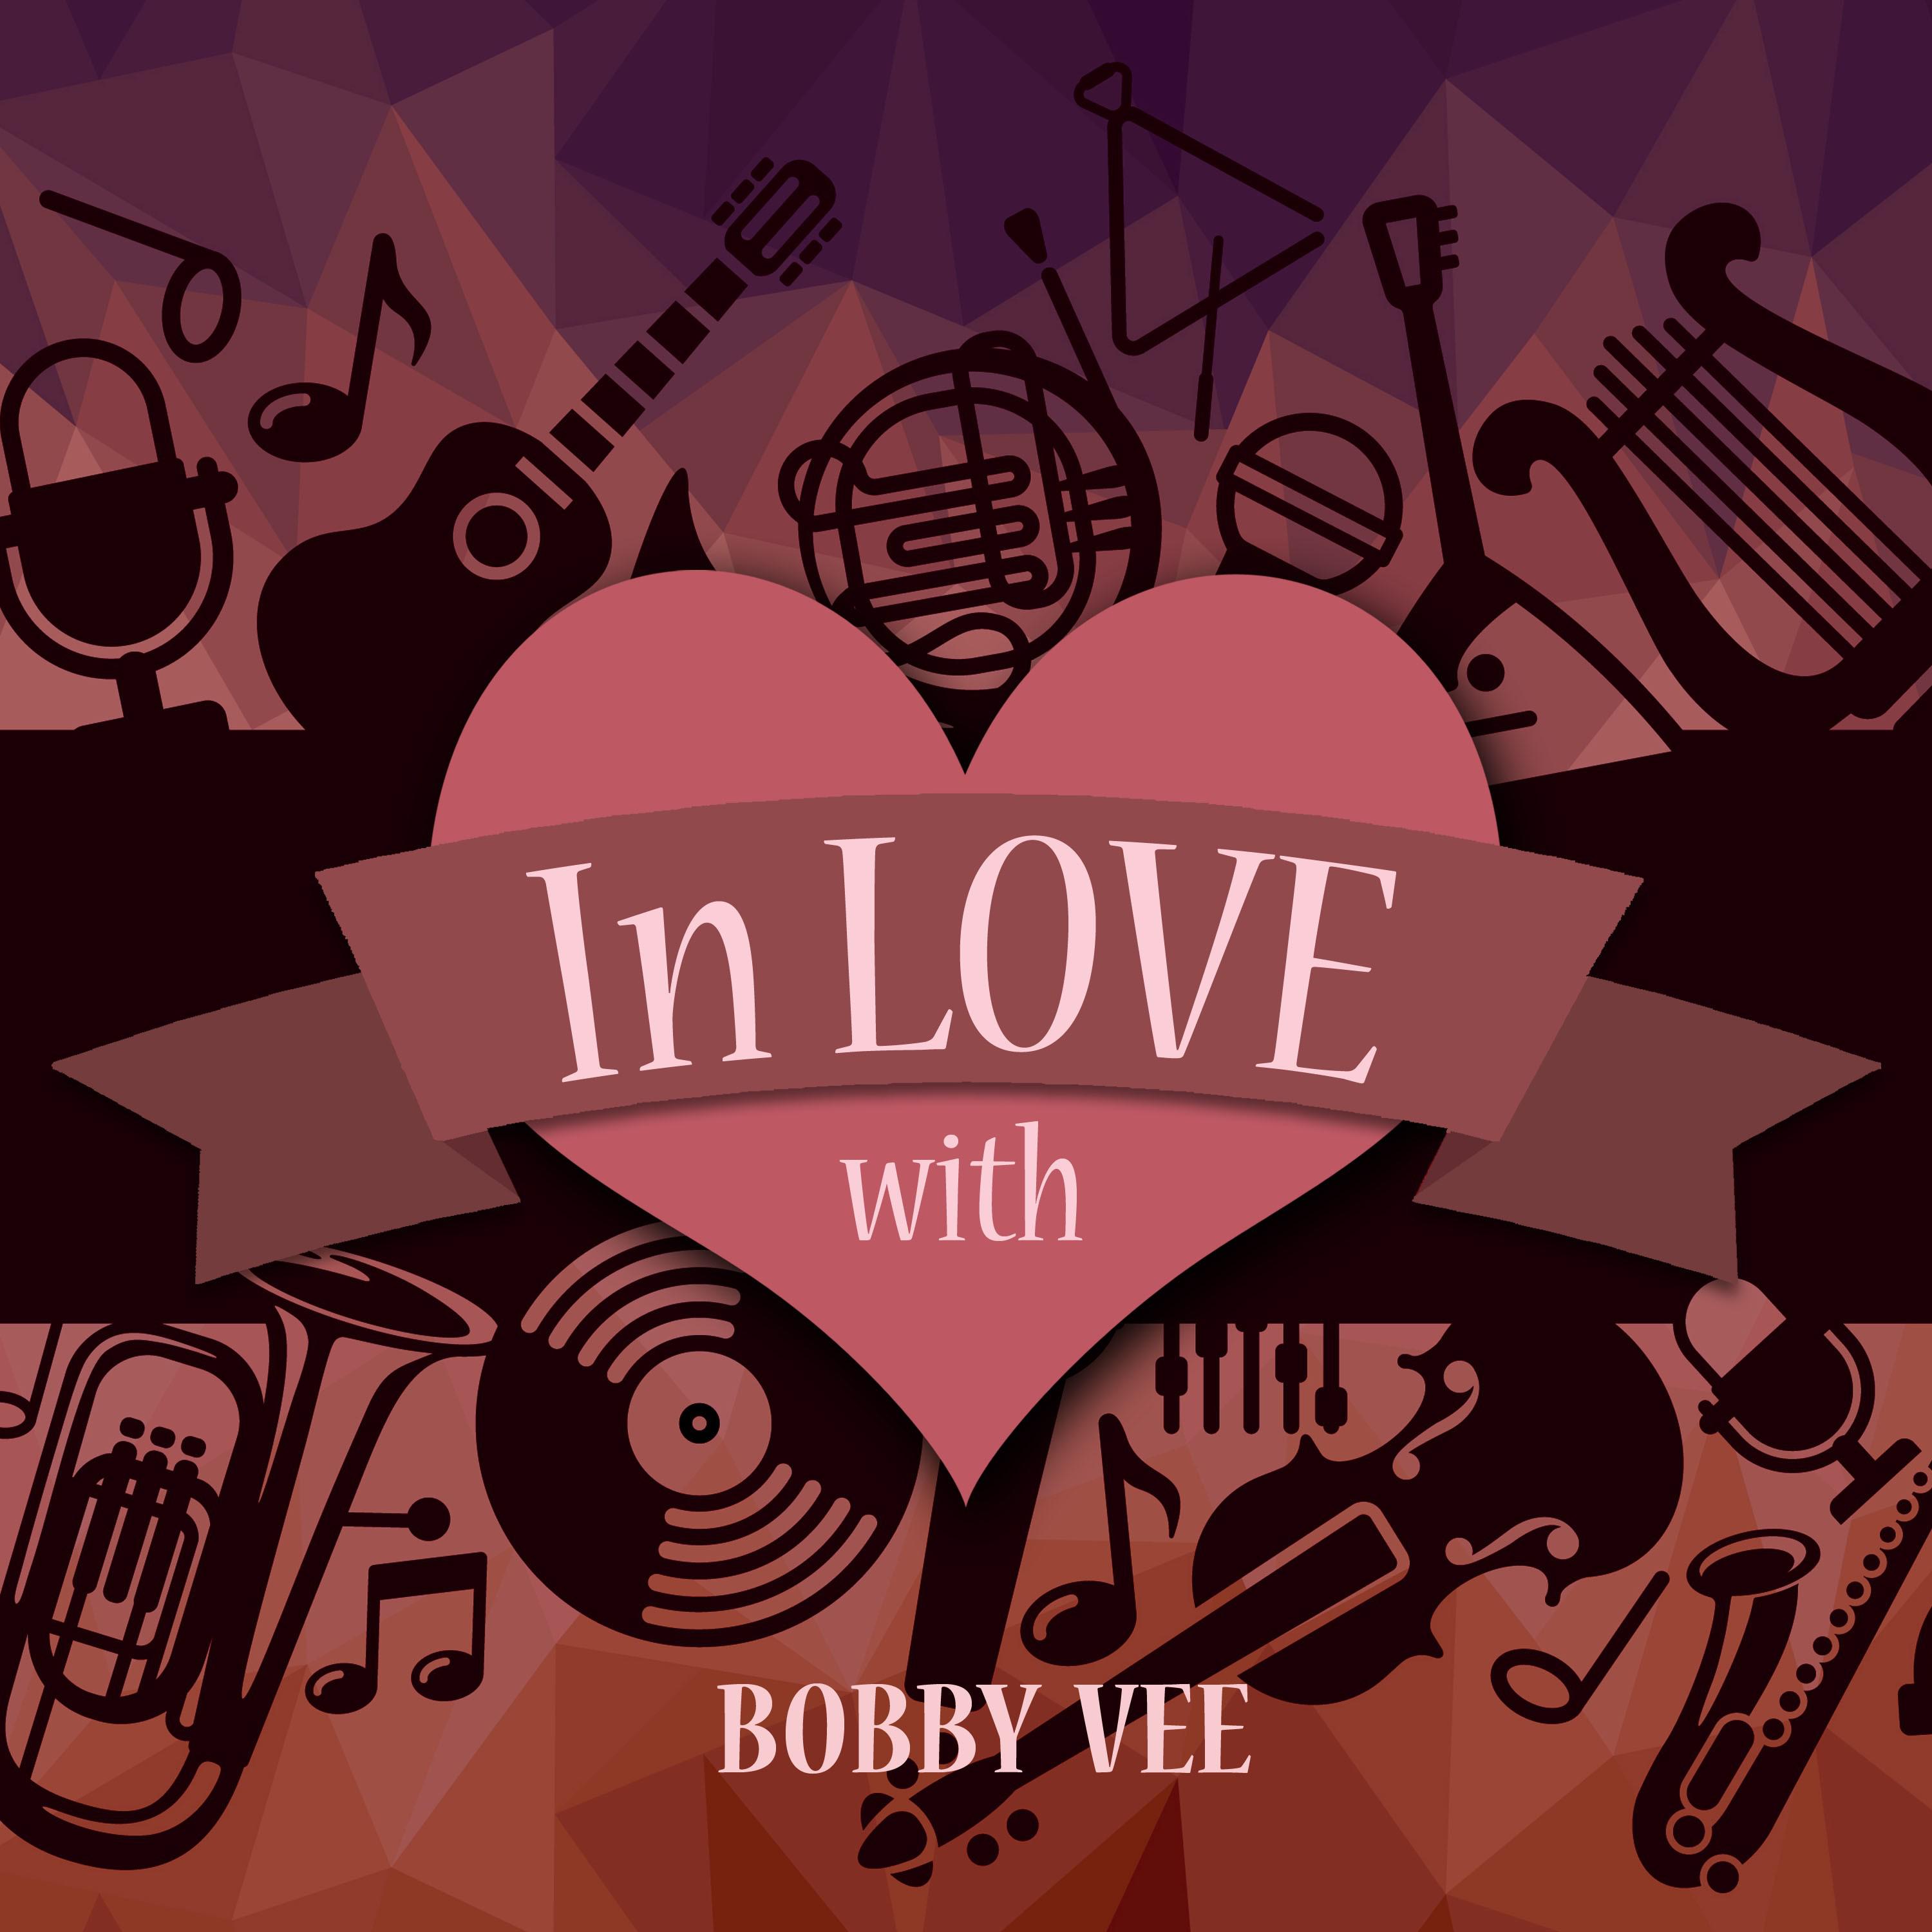 In Love with Bobby Vee